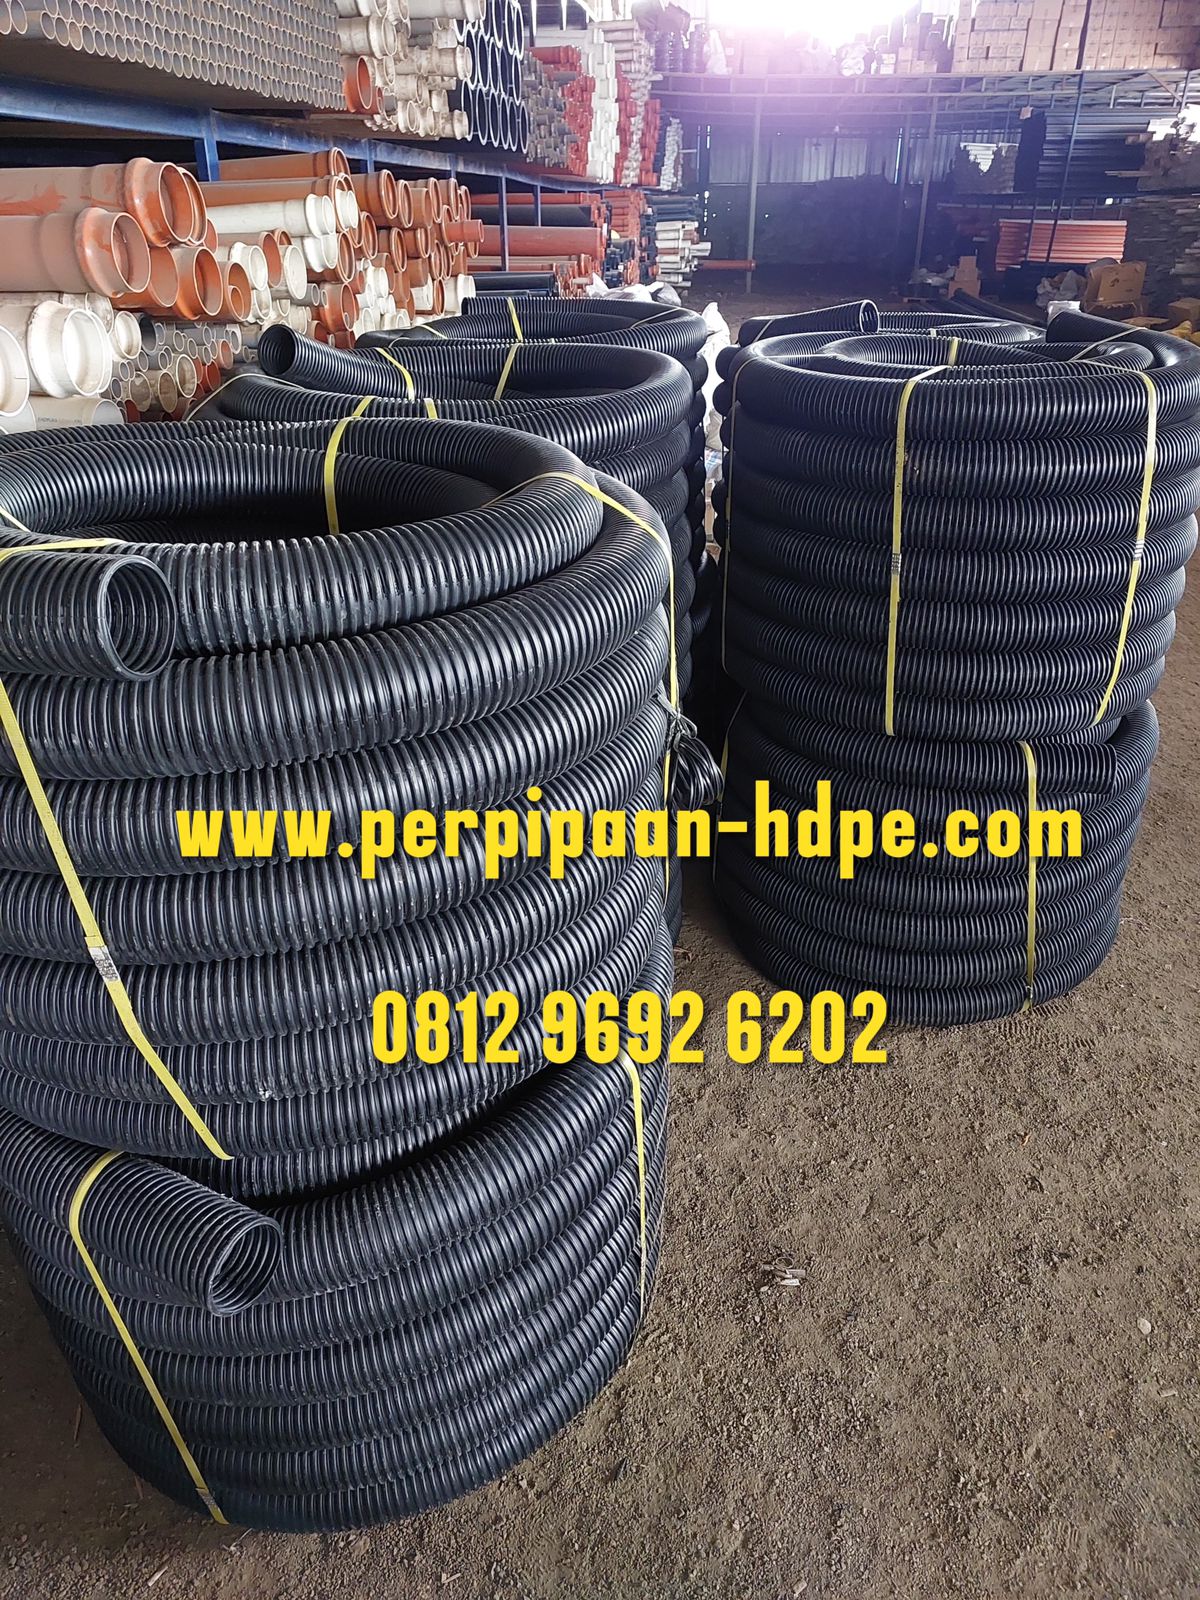 PIPA HDPE CORRUGATED / PERFORATED / PIPA HDPE SPIRAL